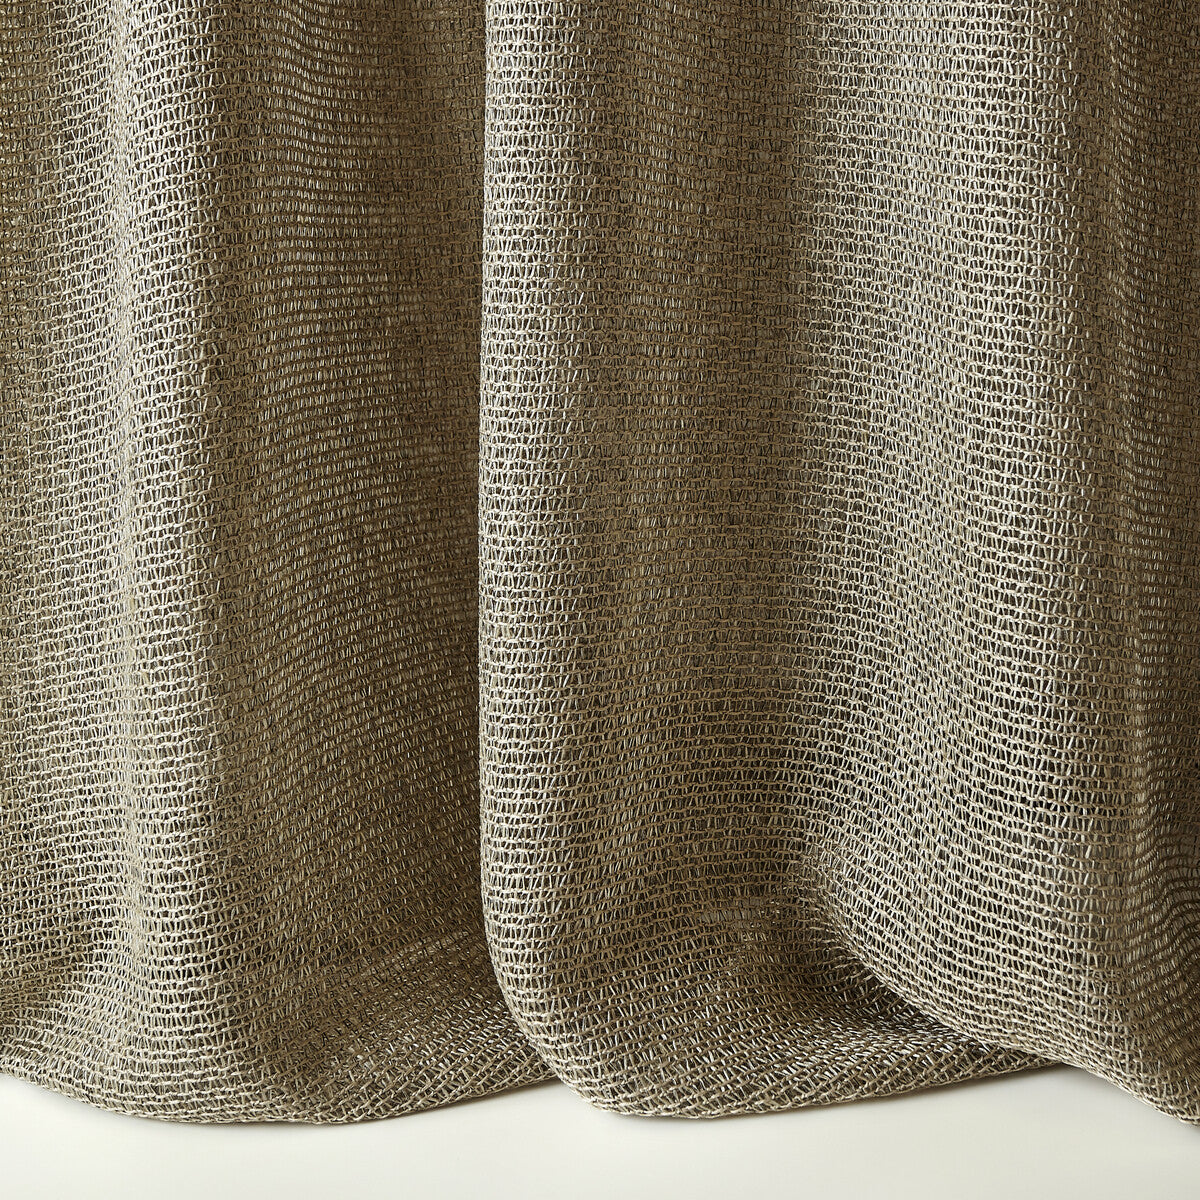 Hidra fabric in 16 color - pattern LZ-30215.16.0 - by Kravet Design in the Lizzo collection